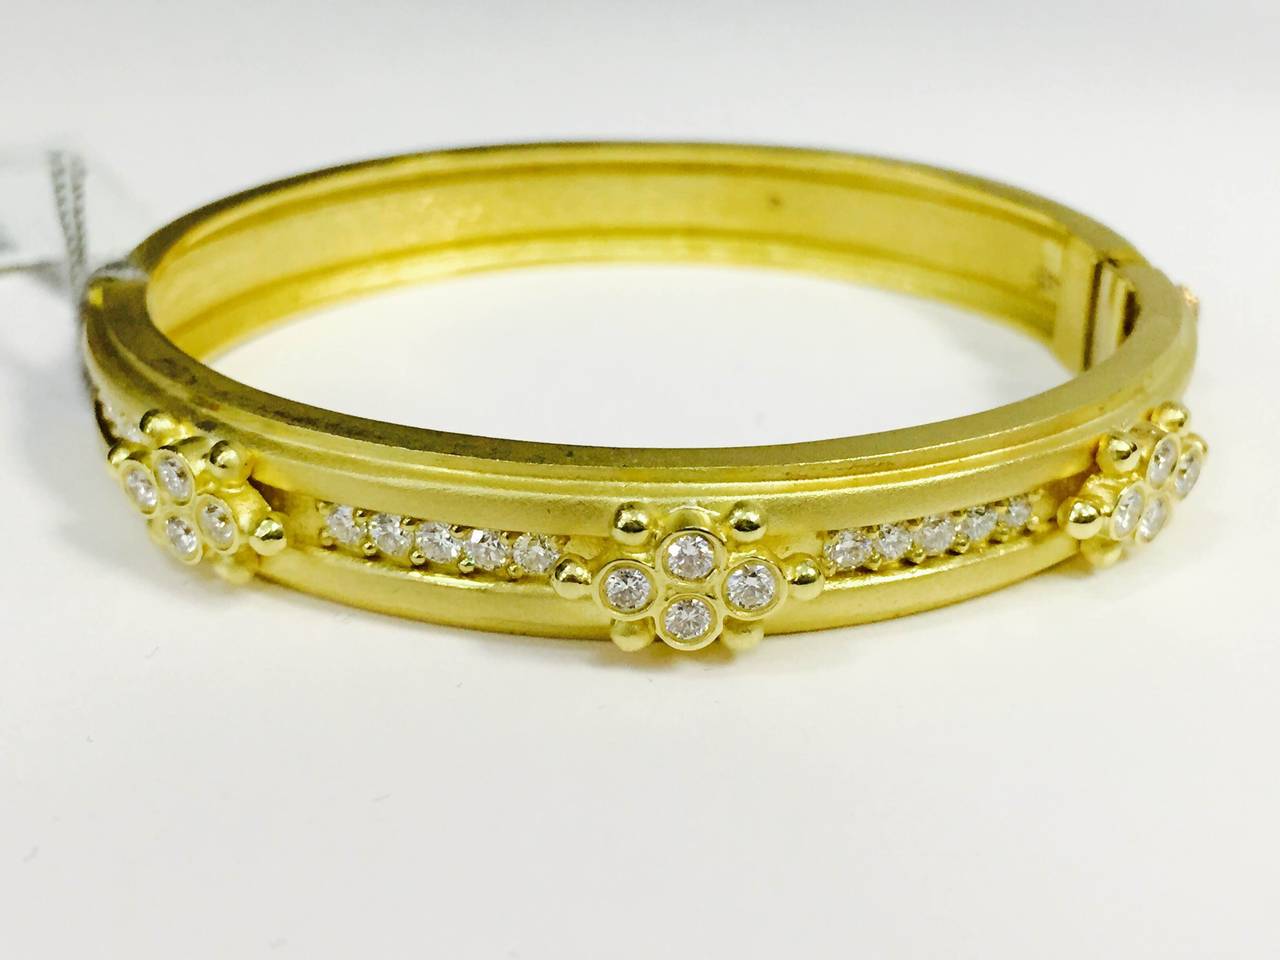 18k Gold & Diamond Bangle bracelet

1.70 ct.'s of G Color, VS Quality Diamonds

Opens and closes with our push button technique- From the Pink Diamond Heart 

Size- 6 3/4 can be sized up or down free of charge.

Last photo with 3 bangles is